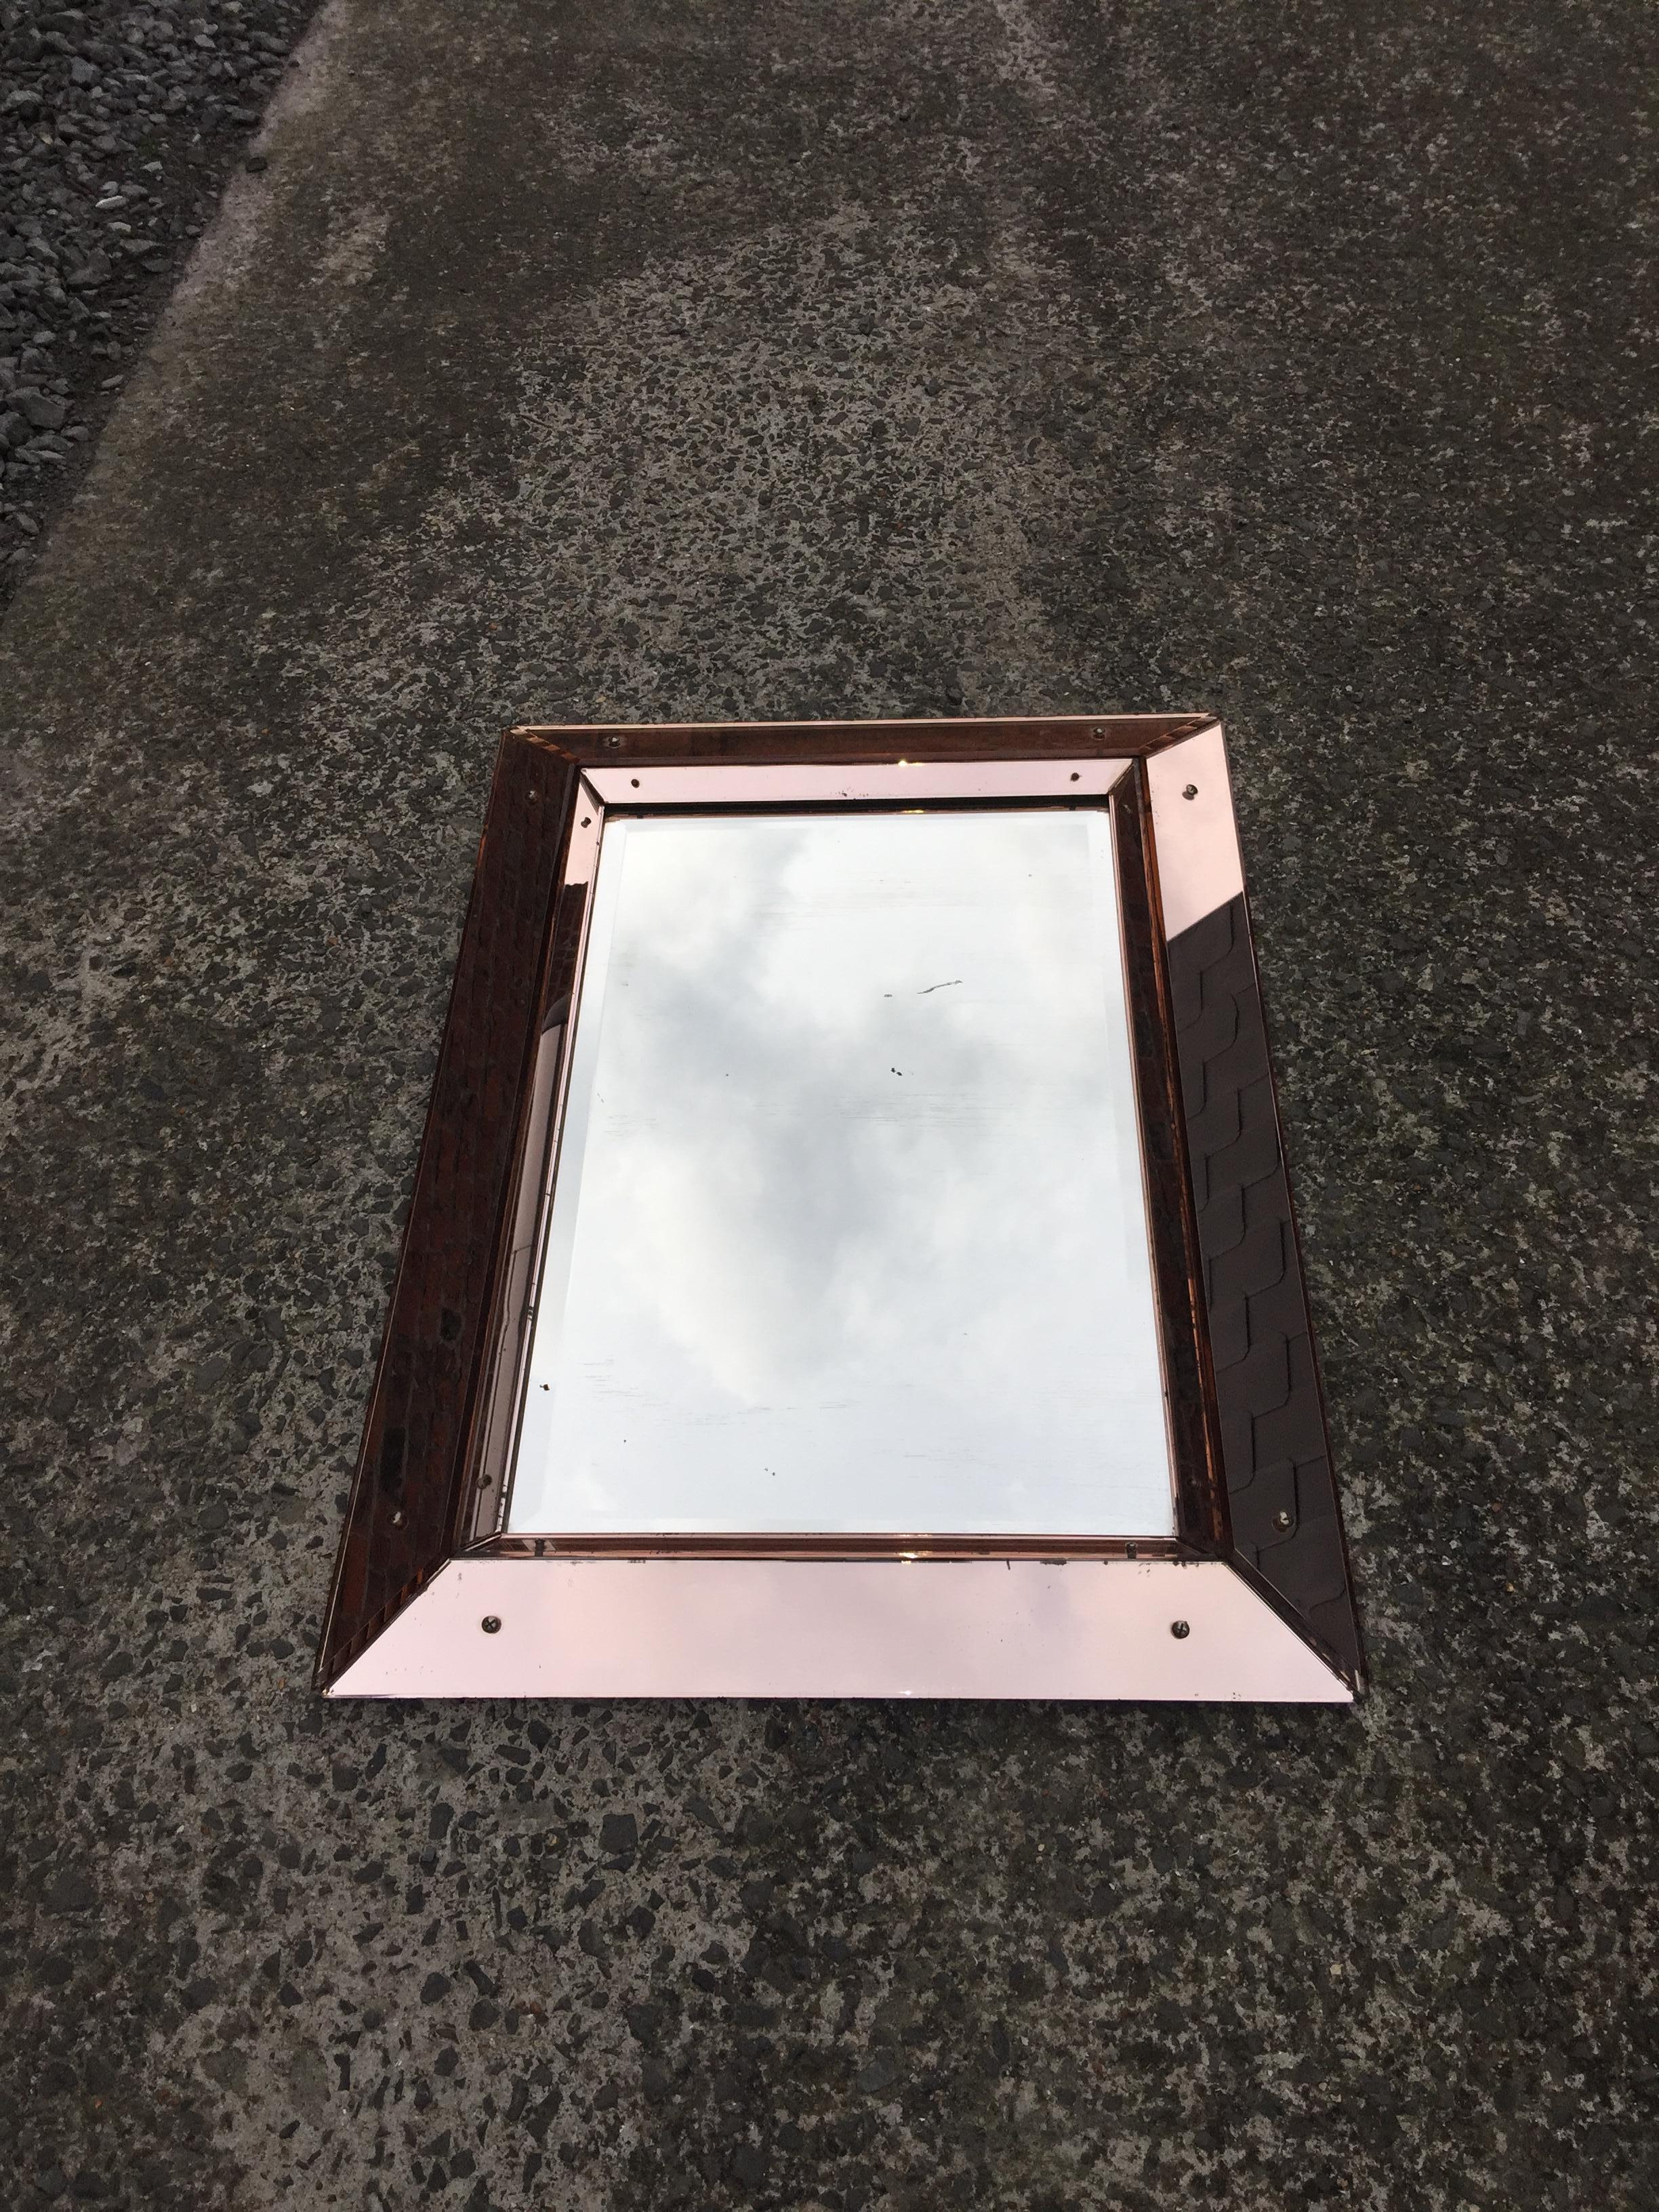 Jacques Adnet (attributed to) Art Deco mirror in pink glass and mirror, circa 1940
good general condition, small wear but no cracks, no breakage
the photos being taken outside there are unfortunately reflections (clouds, bricks).